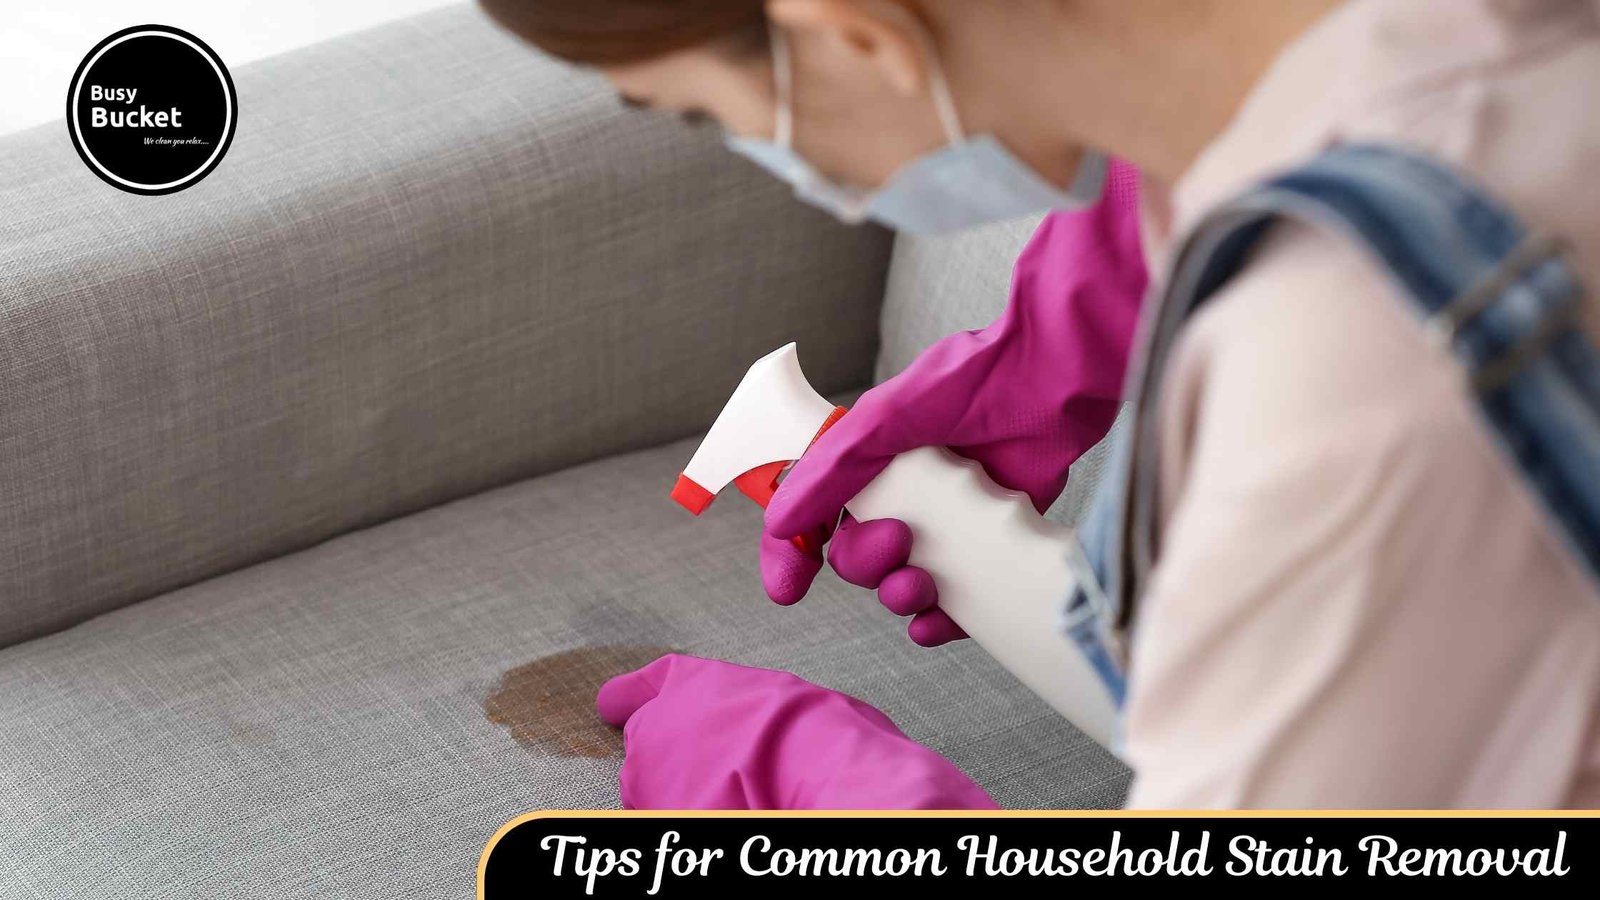 Tips for Common Household Stain Removal